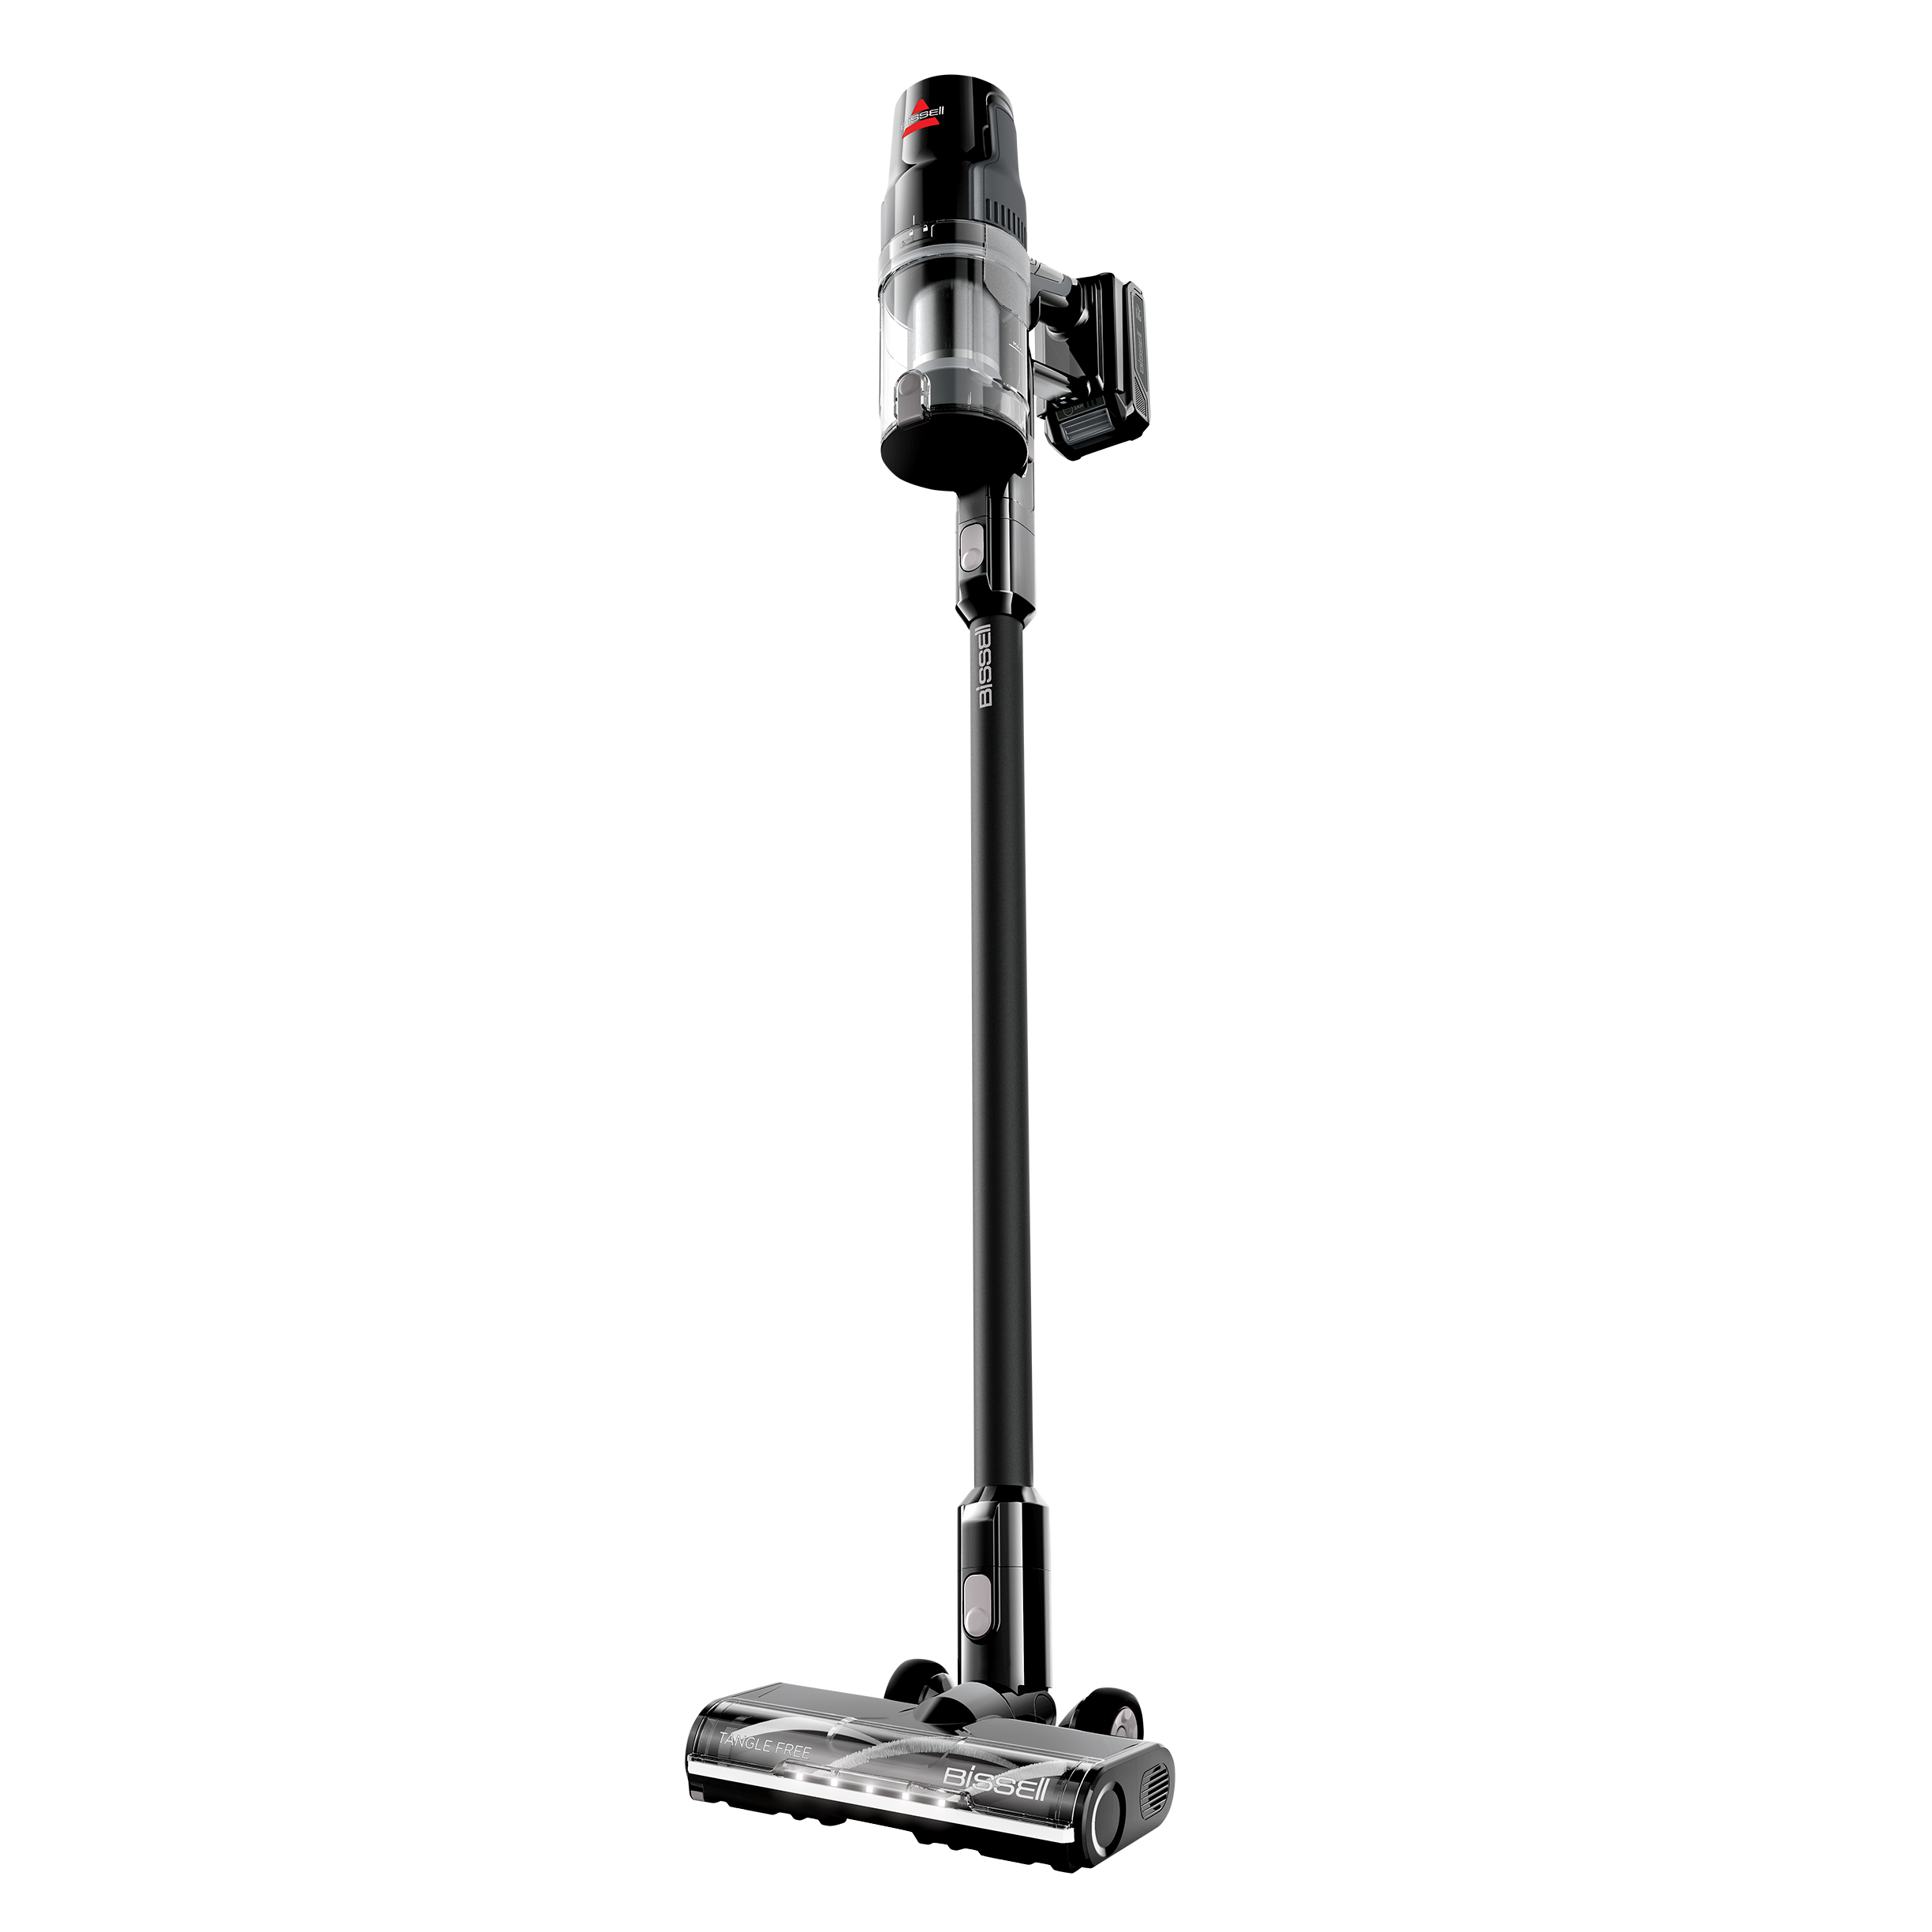 BISSELL Powerlifter Turbo Cordless Stick Vacuum 3789X - image 1 of 7